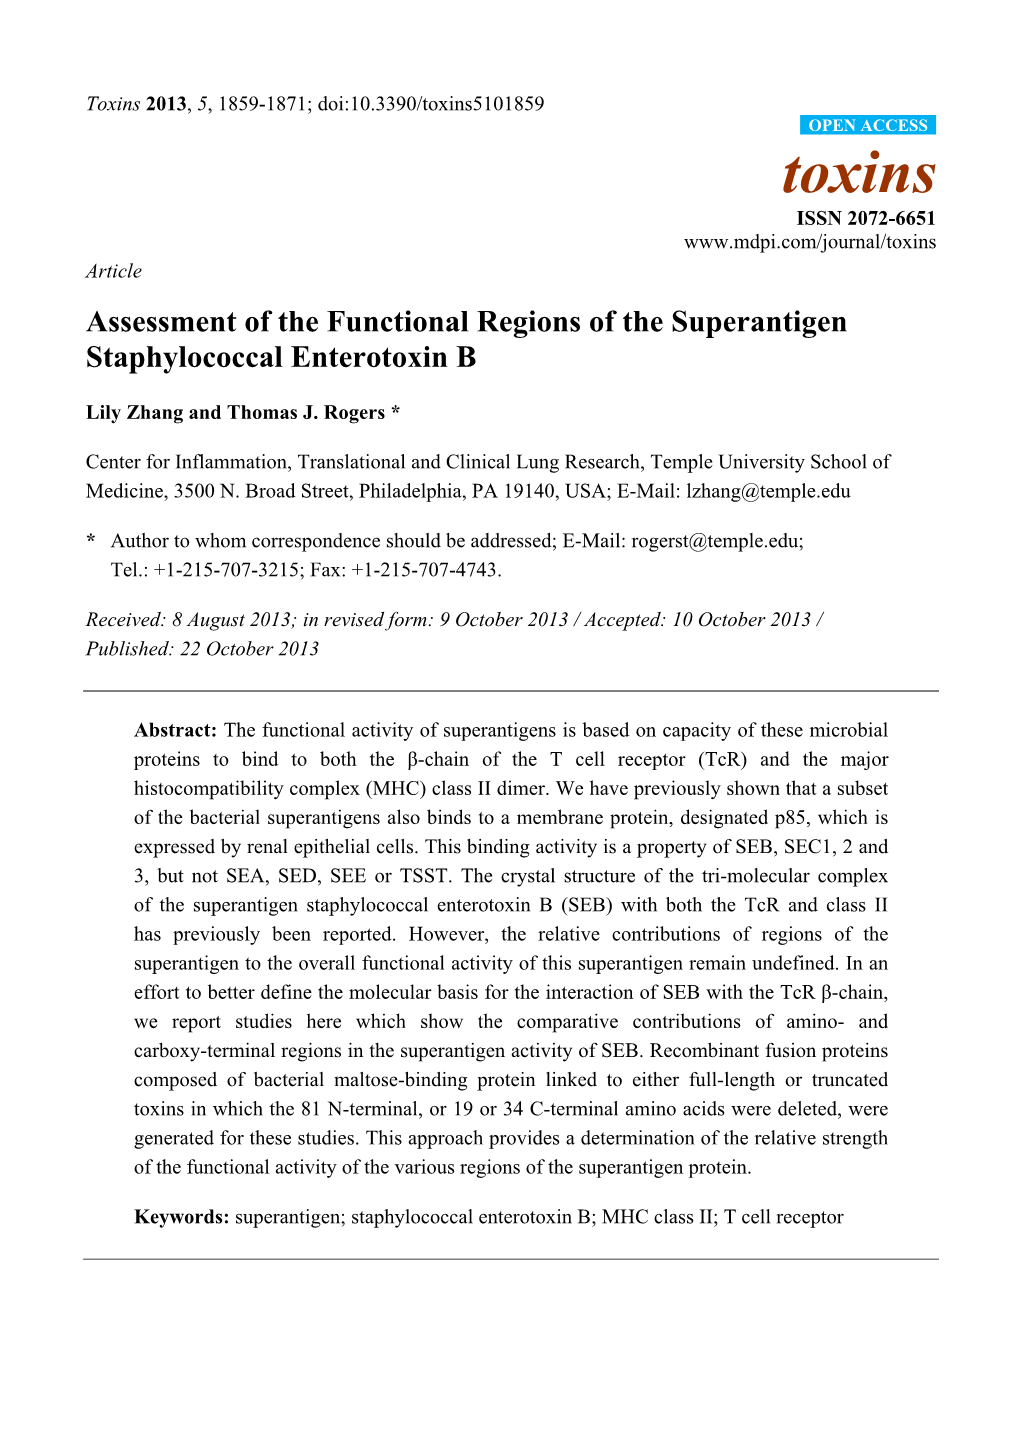 Assessment of the Functional Regions of the Superantigen Staphylococcal Enterotoxin B